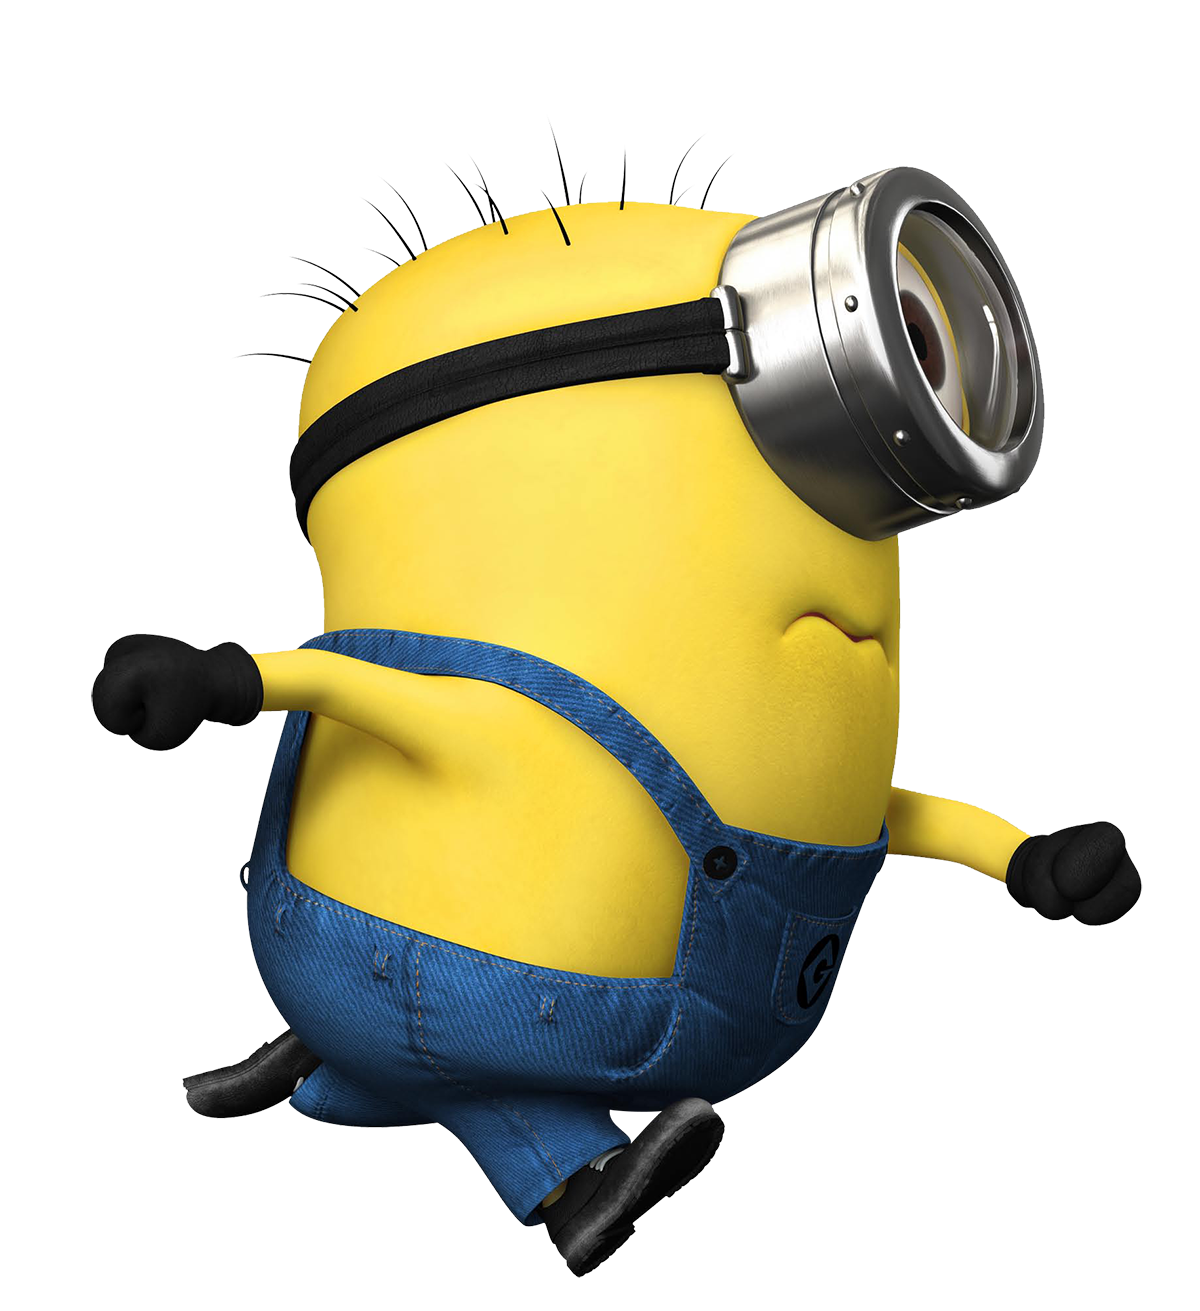 minions png